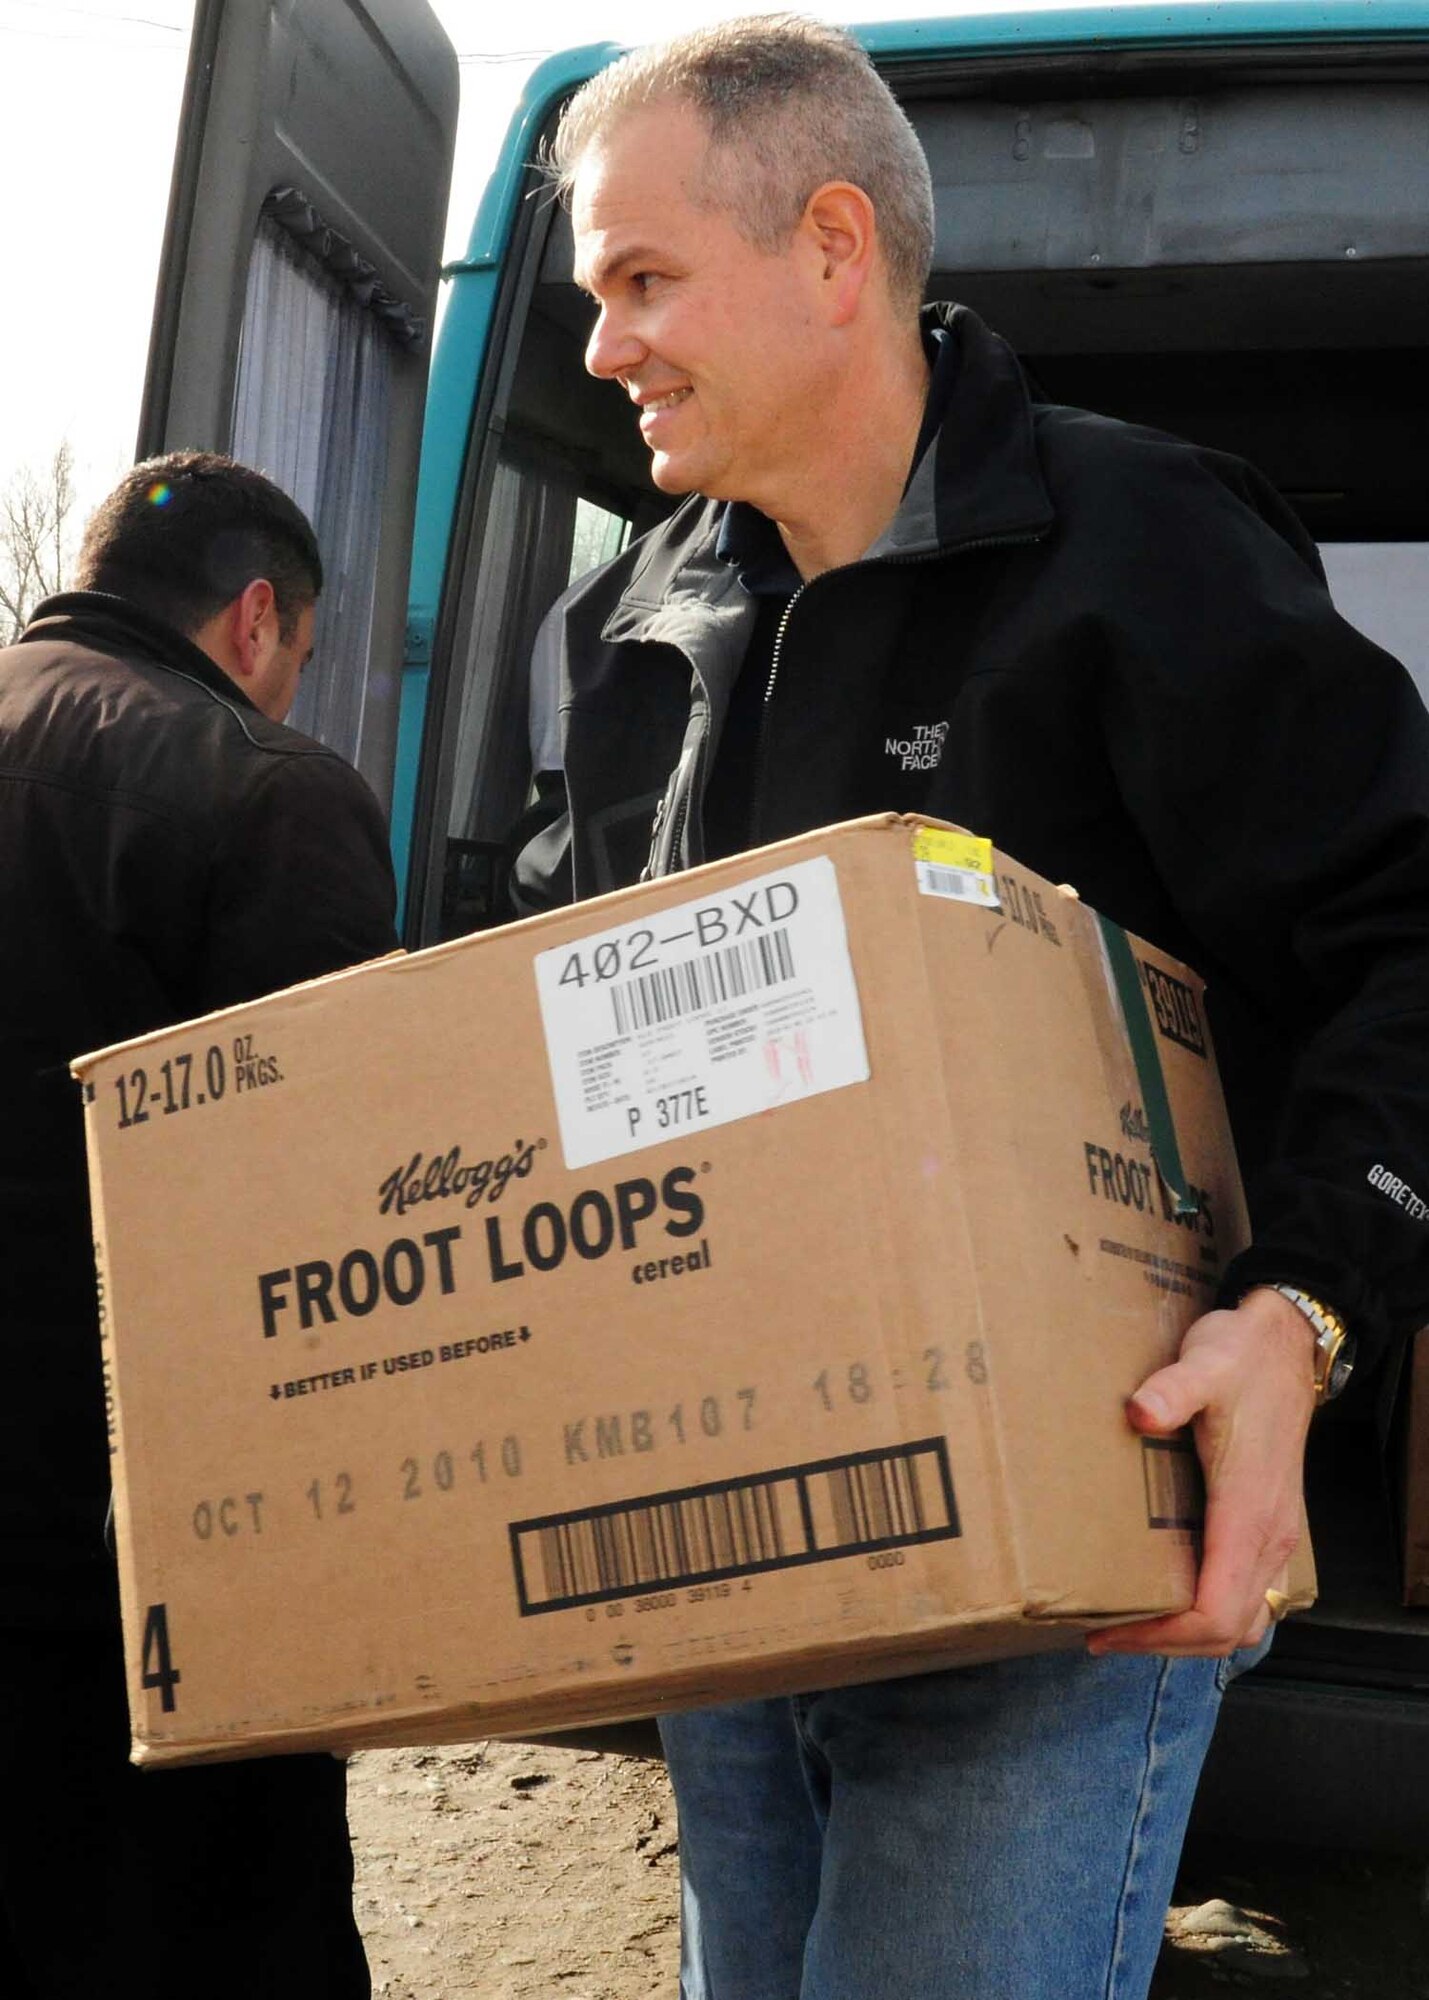 U.S. Air Force Lt. Col. Rex Vanderwood, 376th Expeditionary Mission Support Group deputy commander, unloads a box of humanitarian assistance items he collected from stateside bases and friends to distribute to families in Manas Village, Kyrgyzstan, March 18, 2010. (U.S. Air Force photo/Staff Sgt. Carolyn Viss/released)